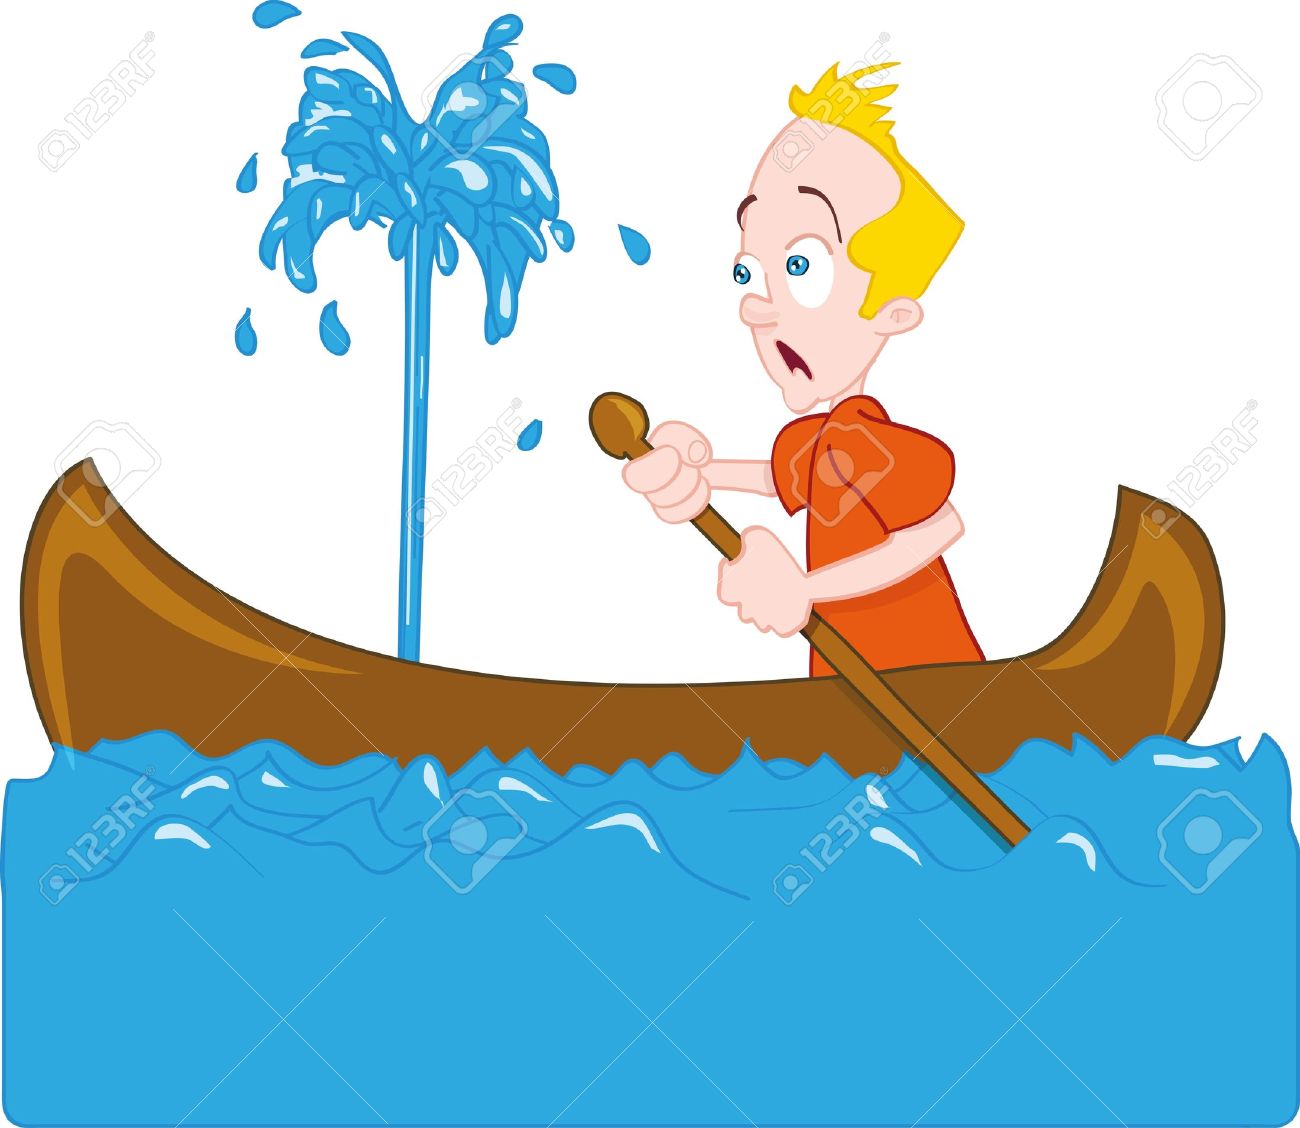 Man And Women In A Sinking Boat Clipart.